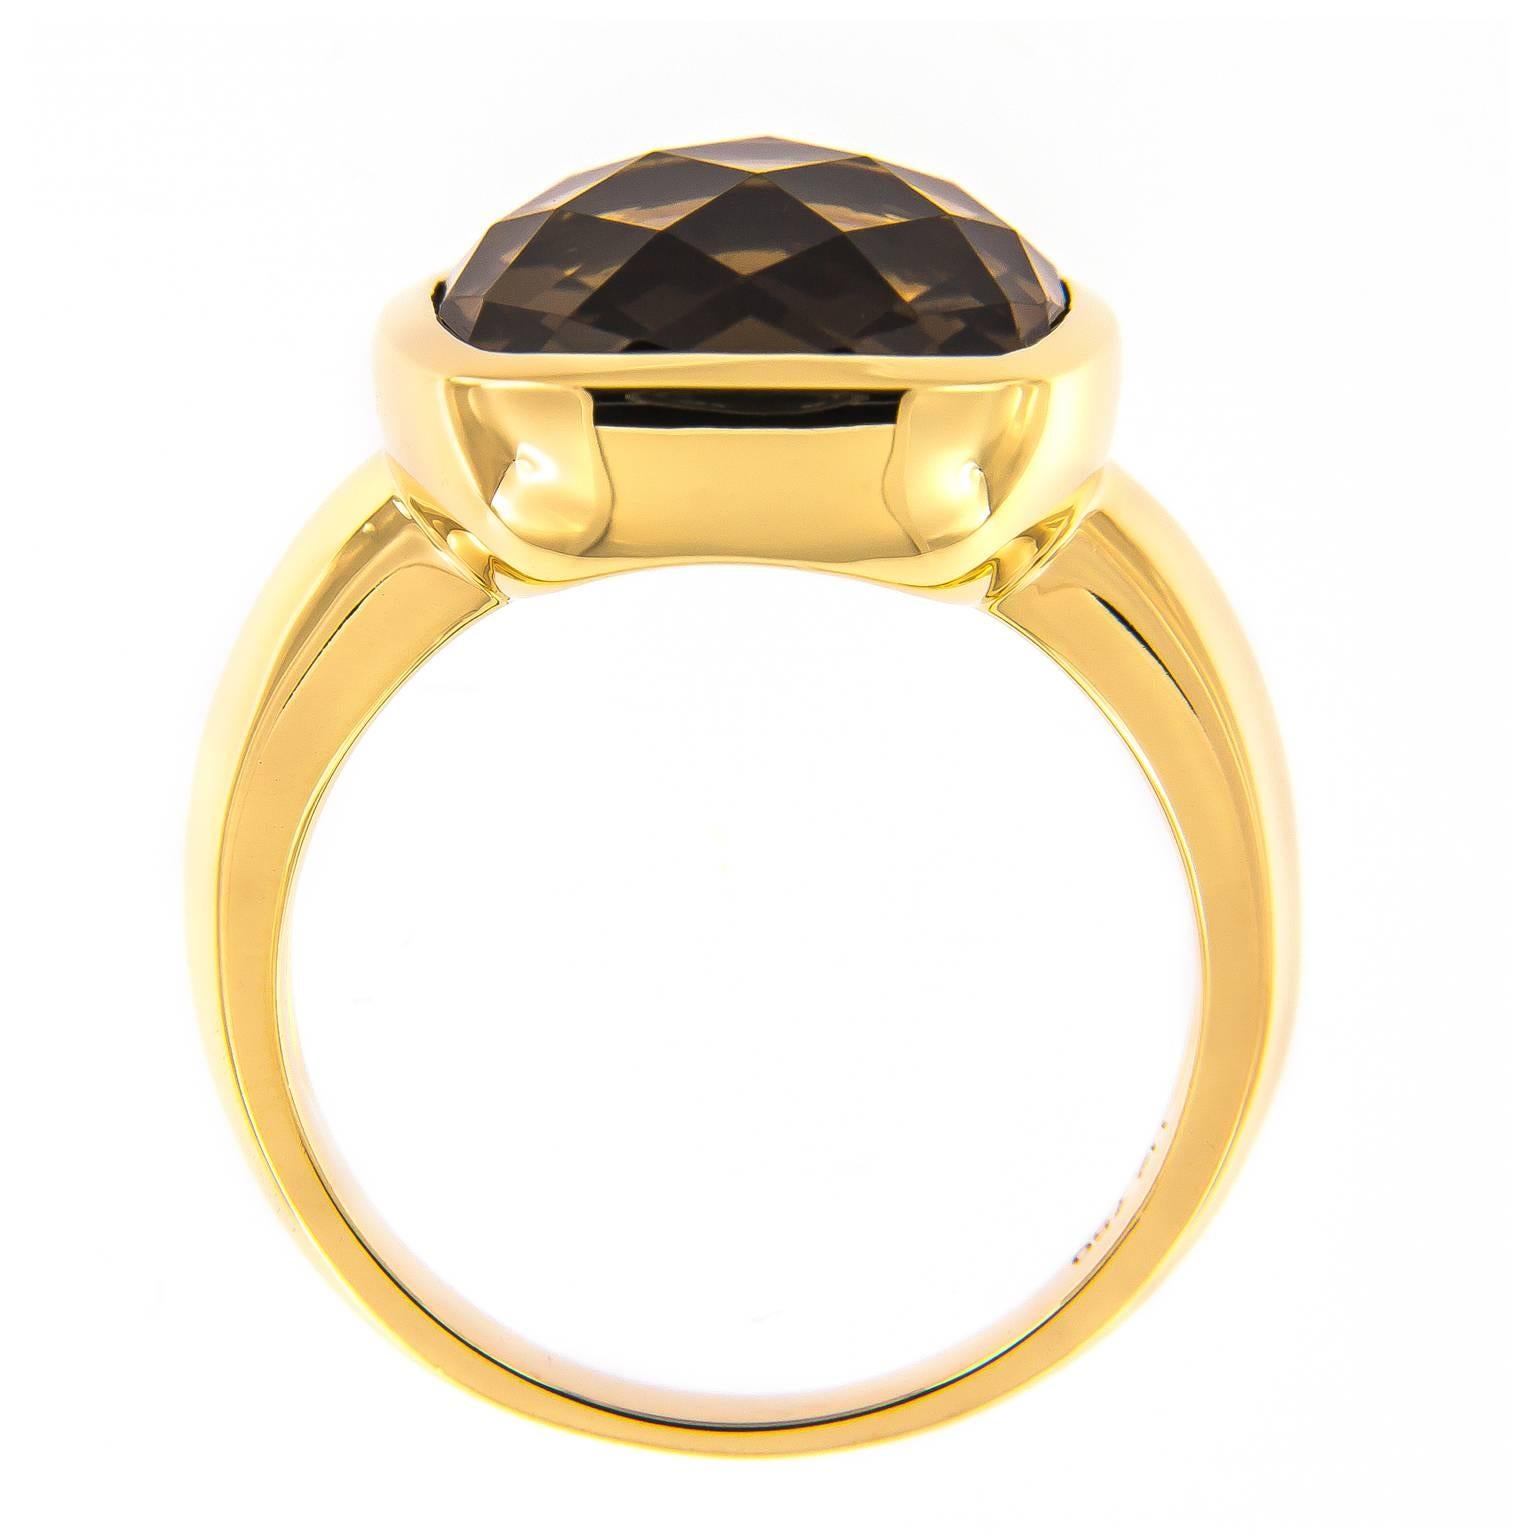 Dramatic and rich, this fashion ring from the H2 Collection by Hammerman of New York is a luxe choice. The checkerboard cushion cut topaz is set in 18k yellow gold. Ring Size 6.25

Smoky Topaz 8.65 carat.